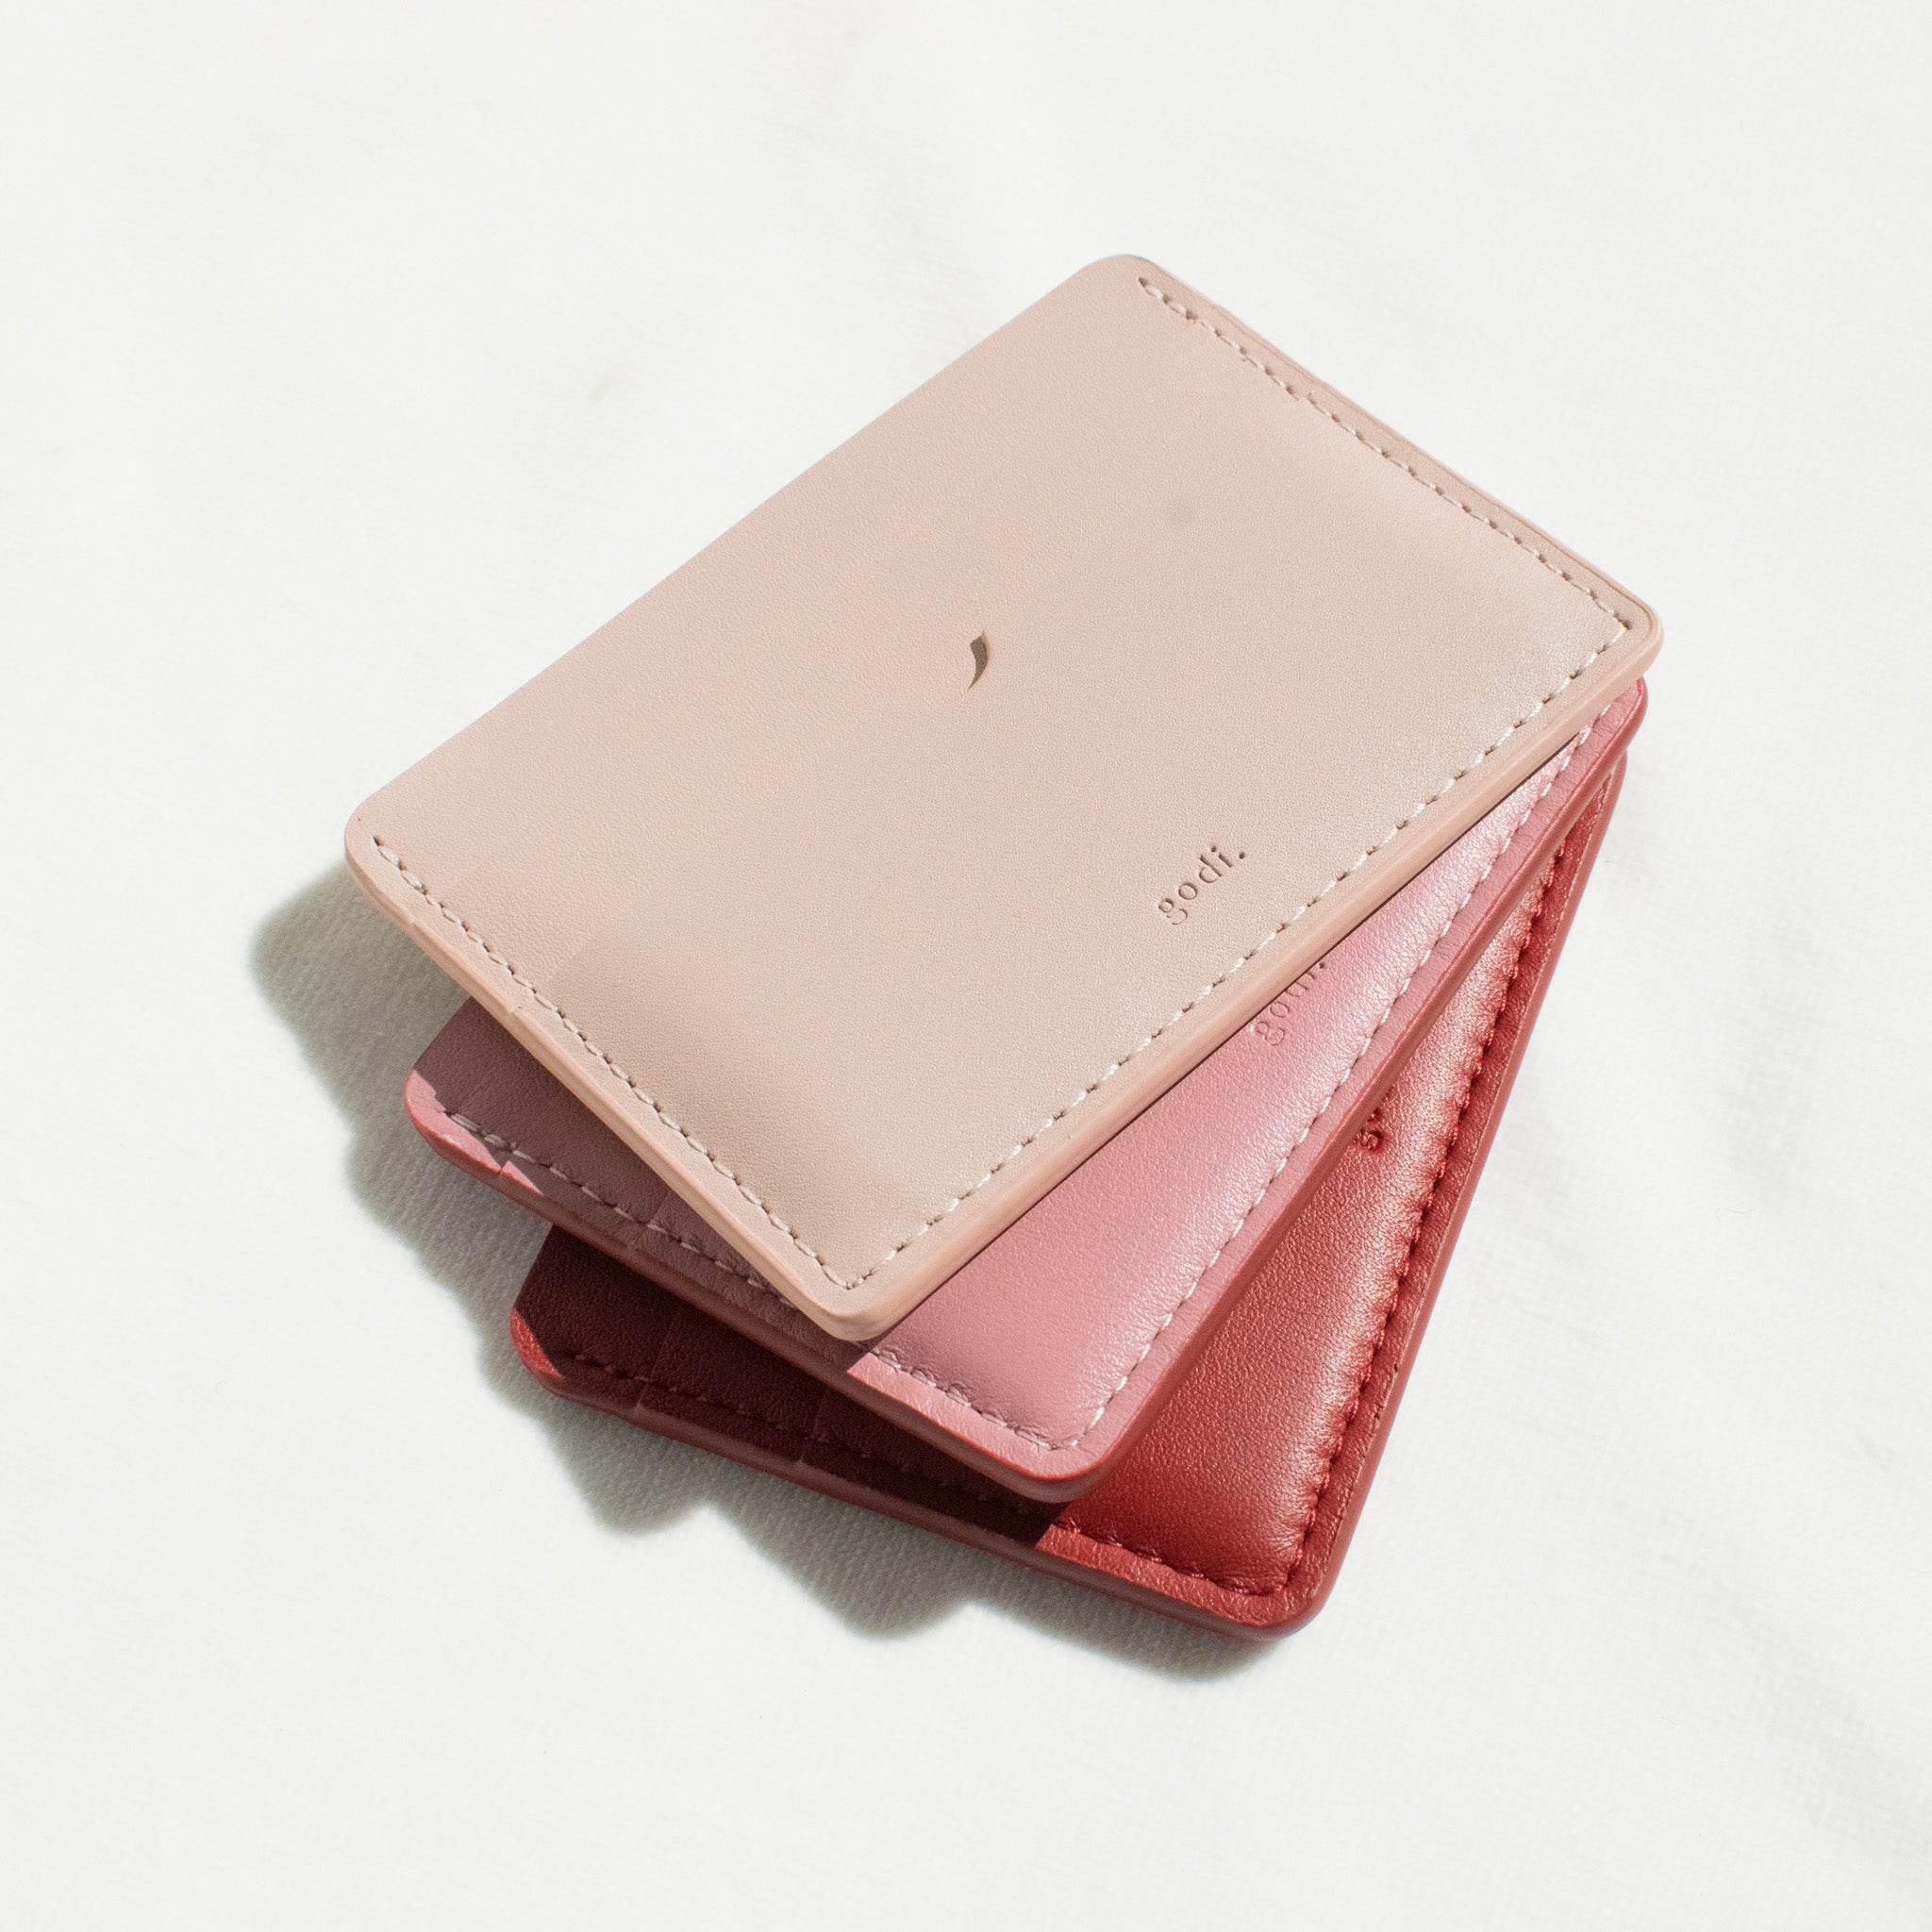 Card Case in Nude Pink